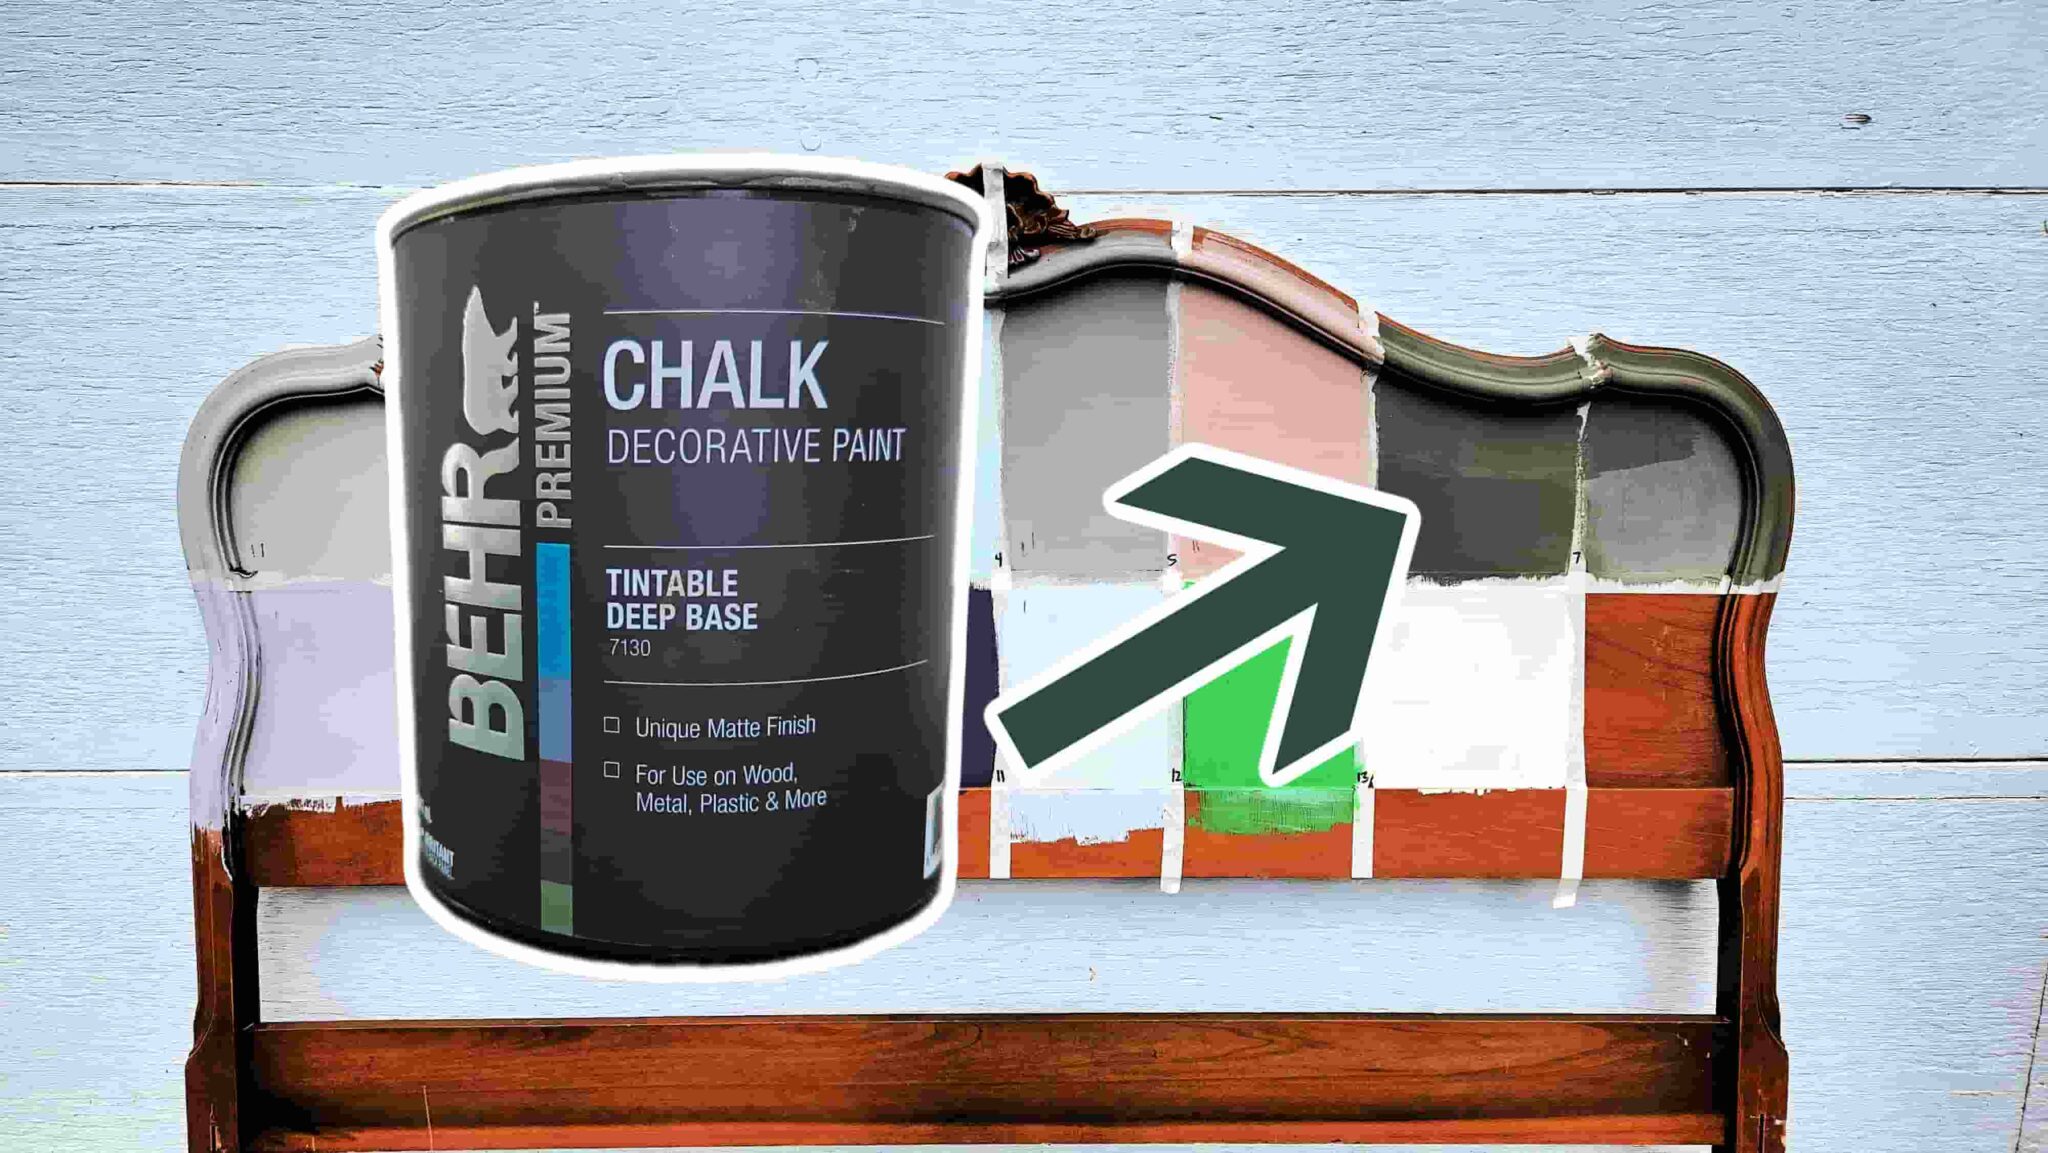 Behr Chalk Decorative Paint Review In Side By Side Comparison 1 2048x1153 